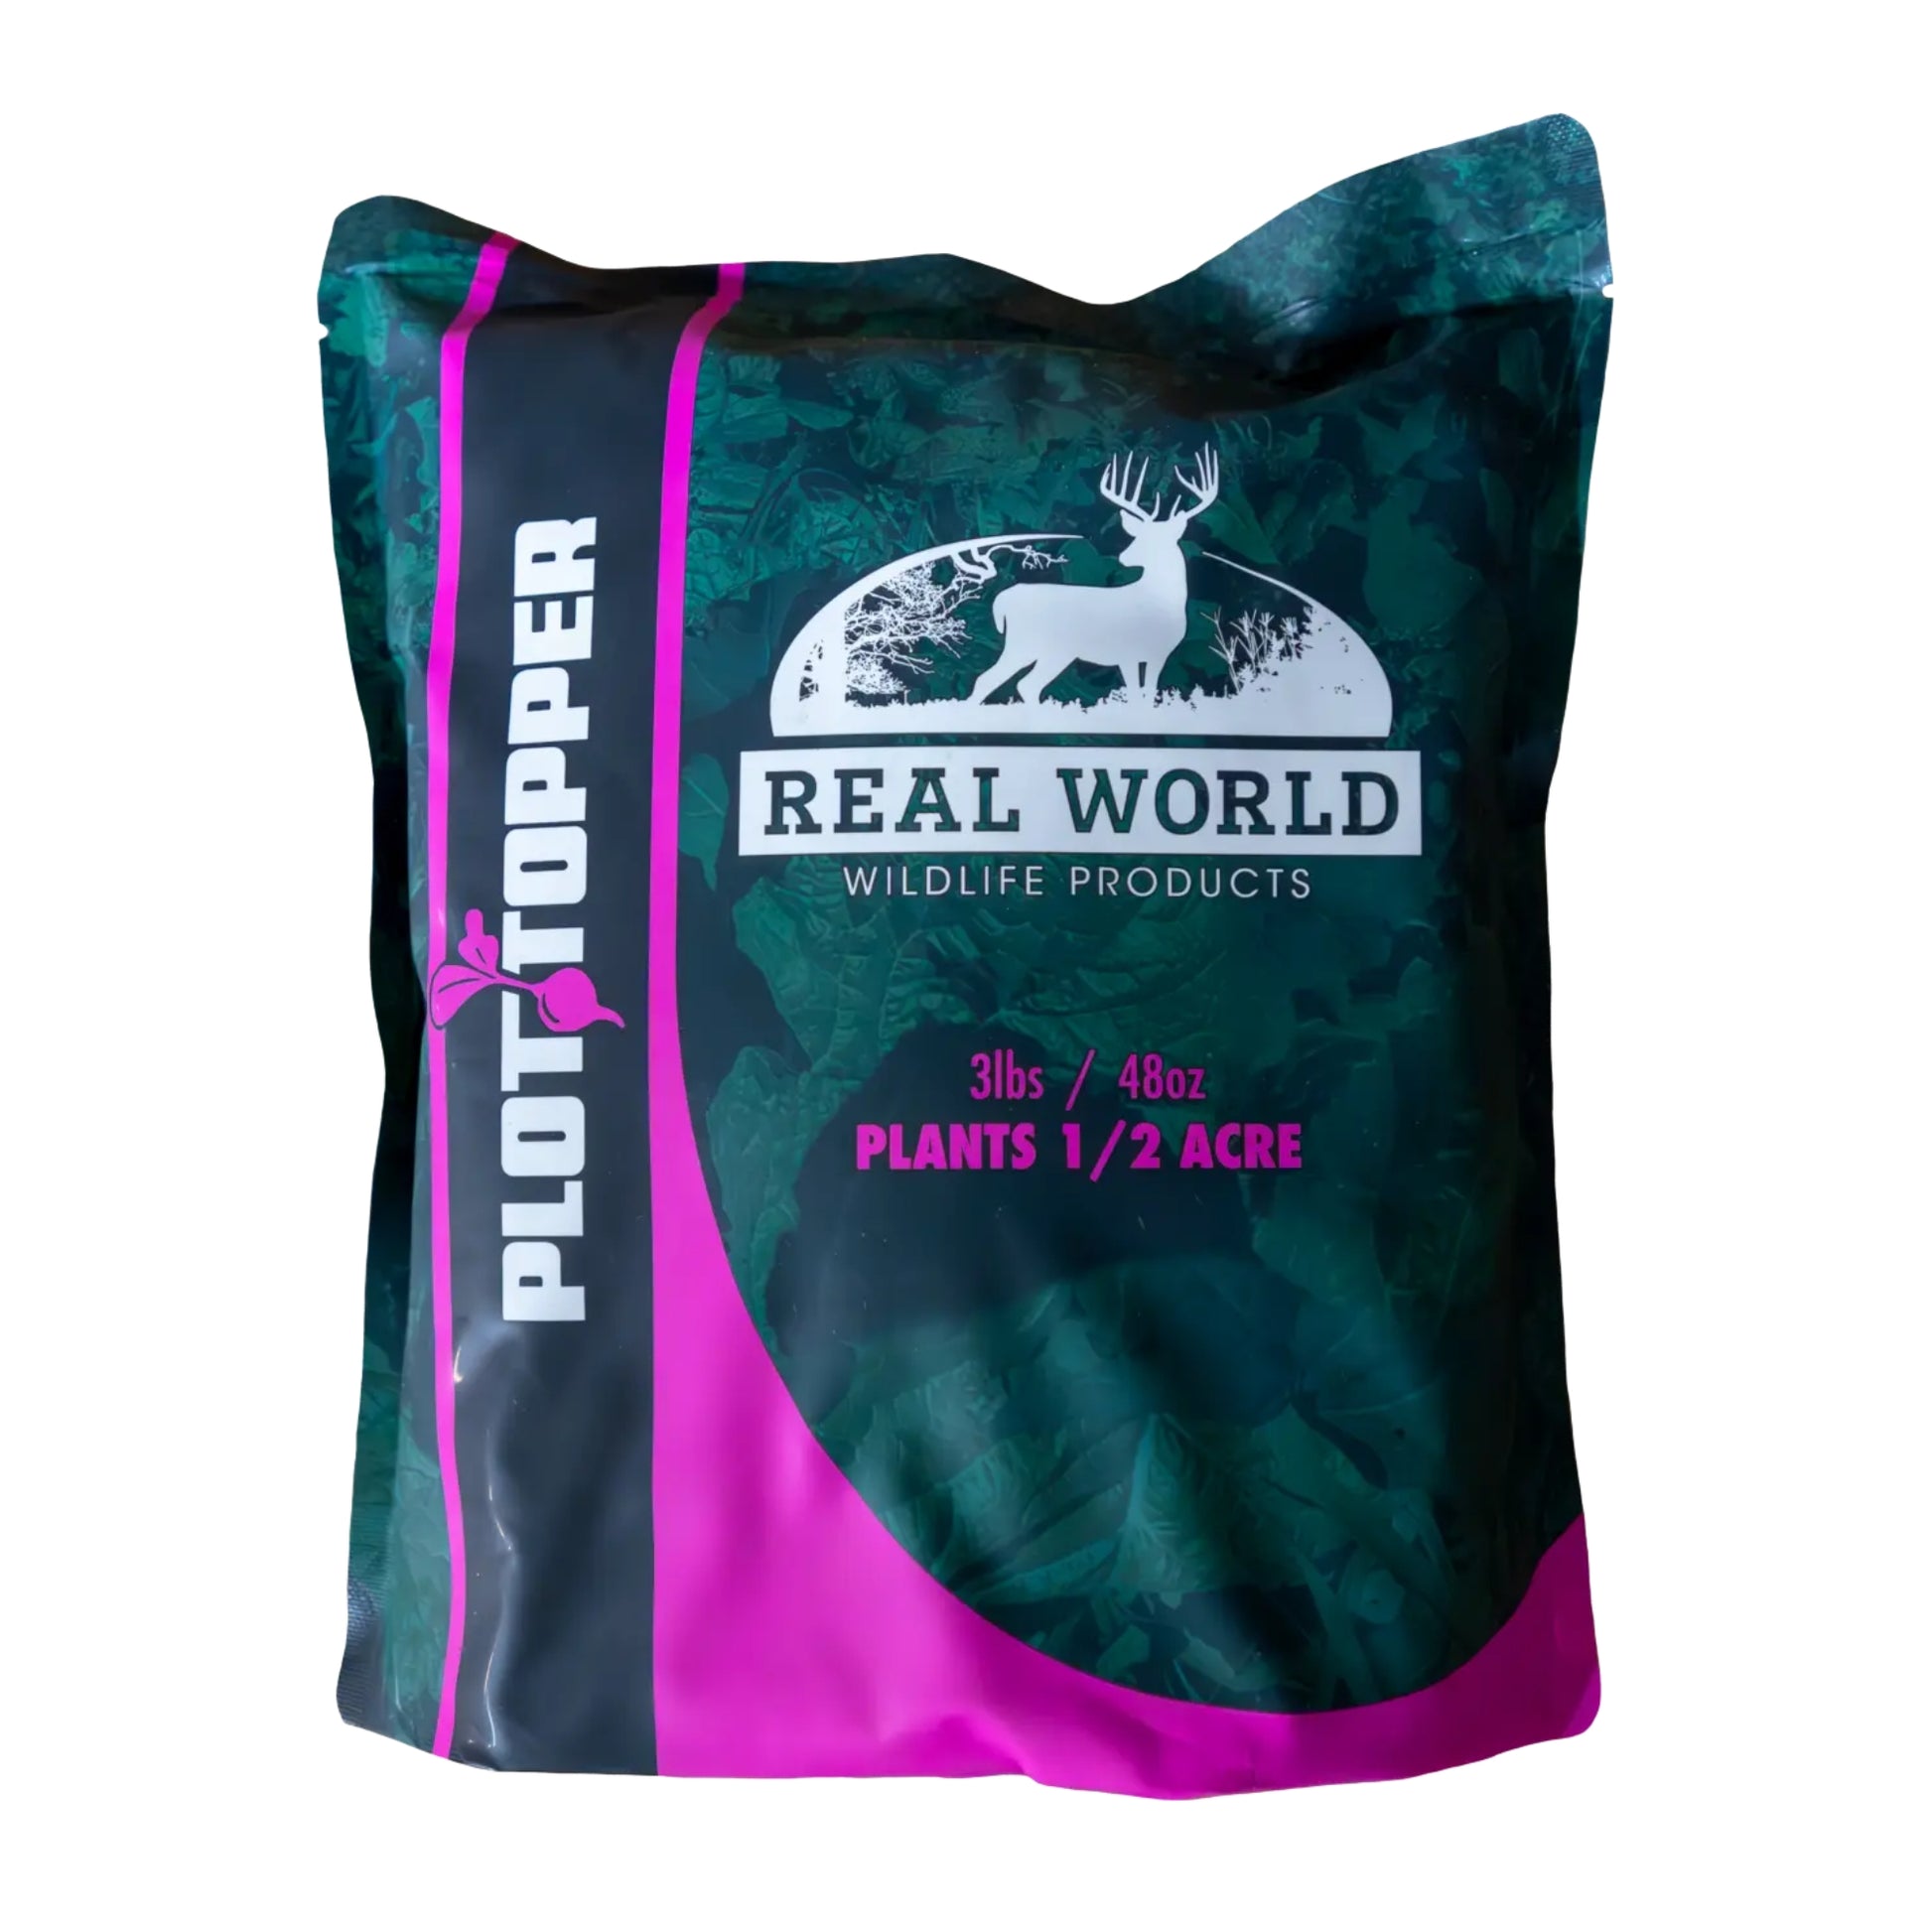 realworld wildlife products plot topper bag